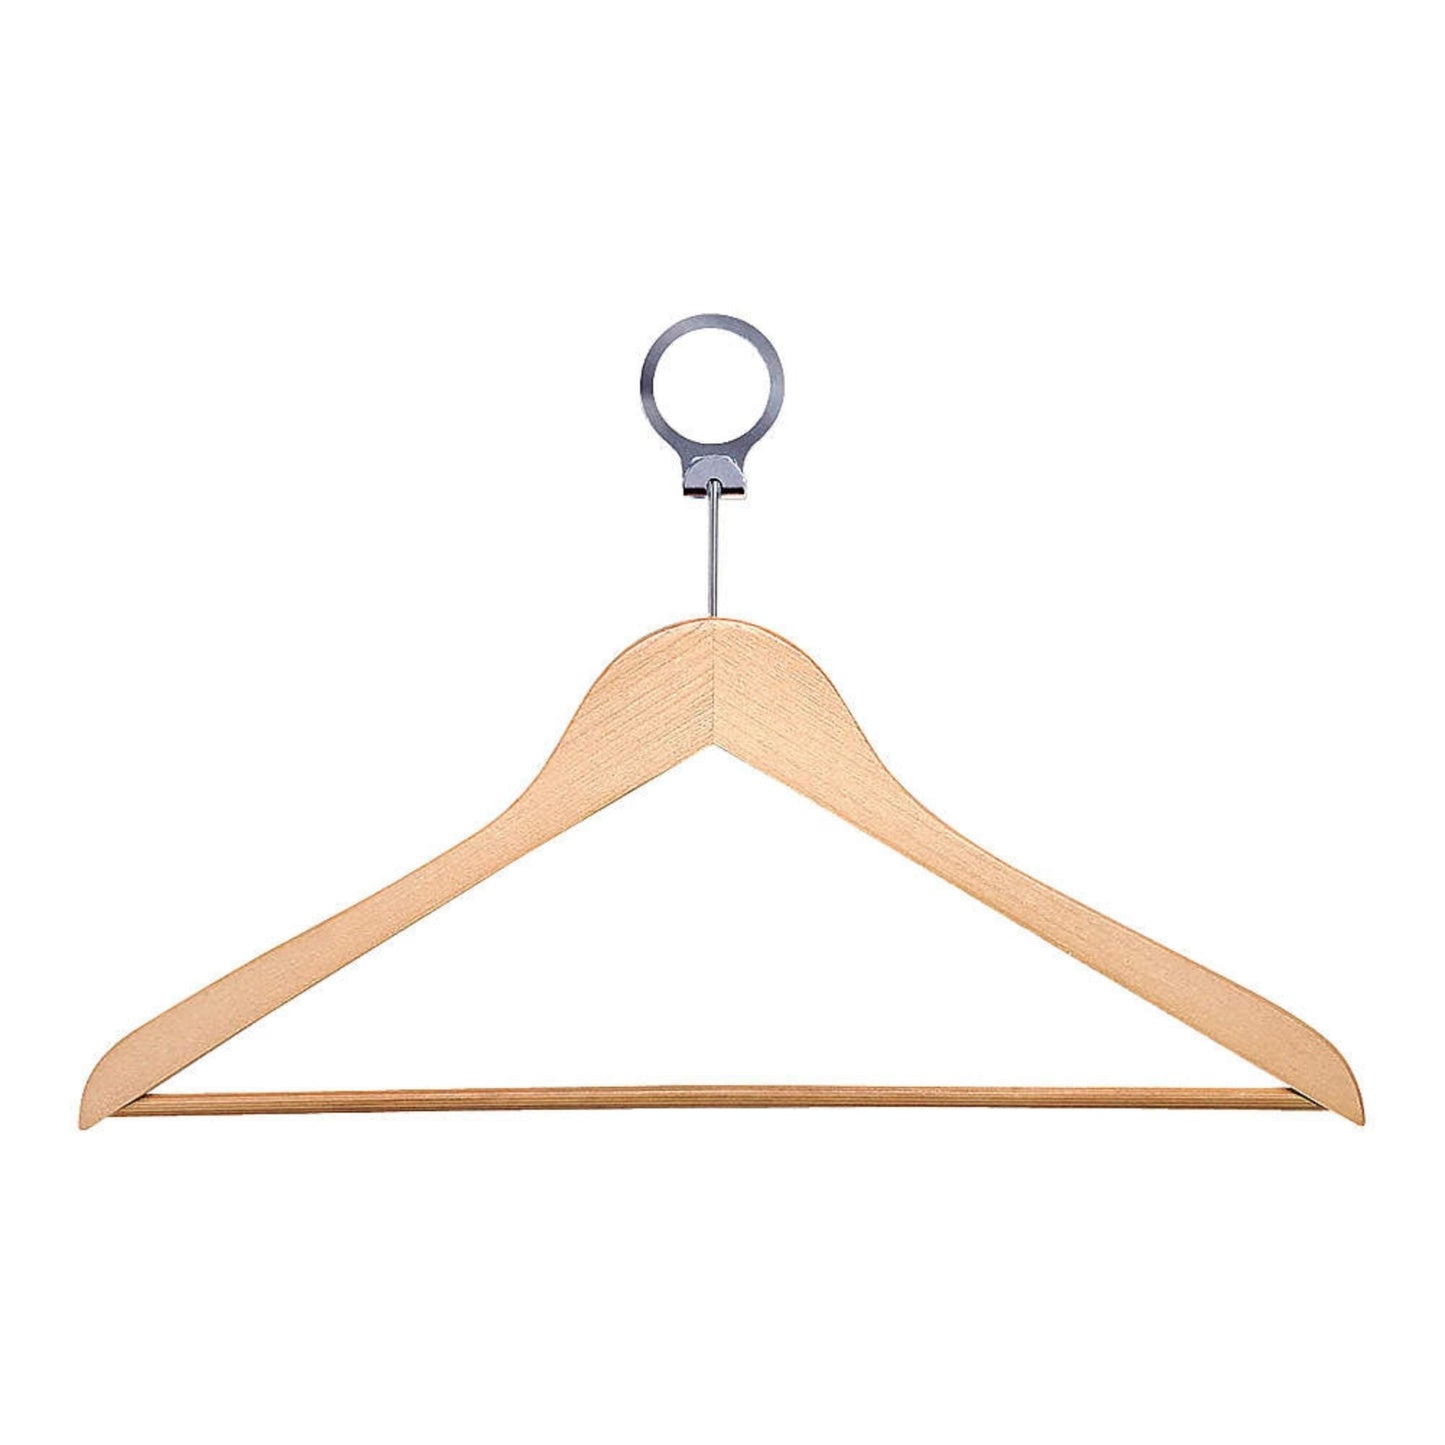 Solid Natural Wood Hangers - Multiple Styles Available